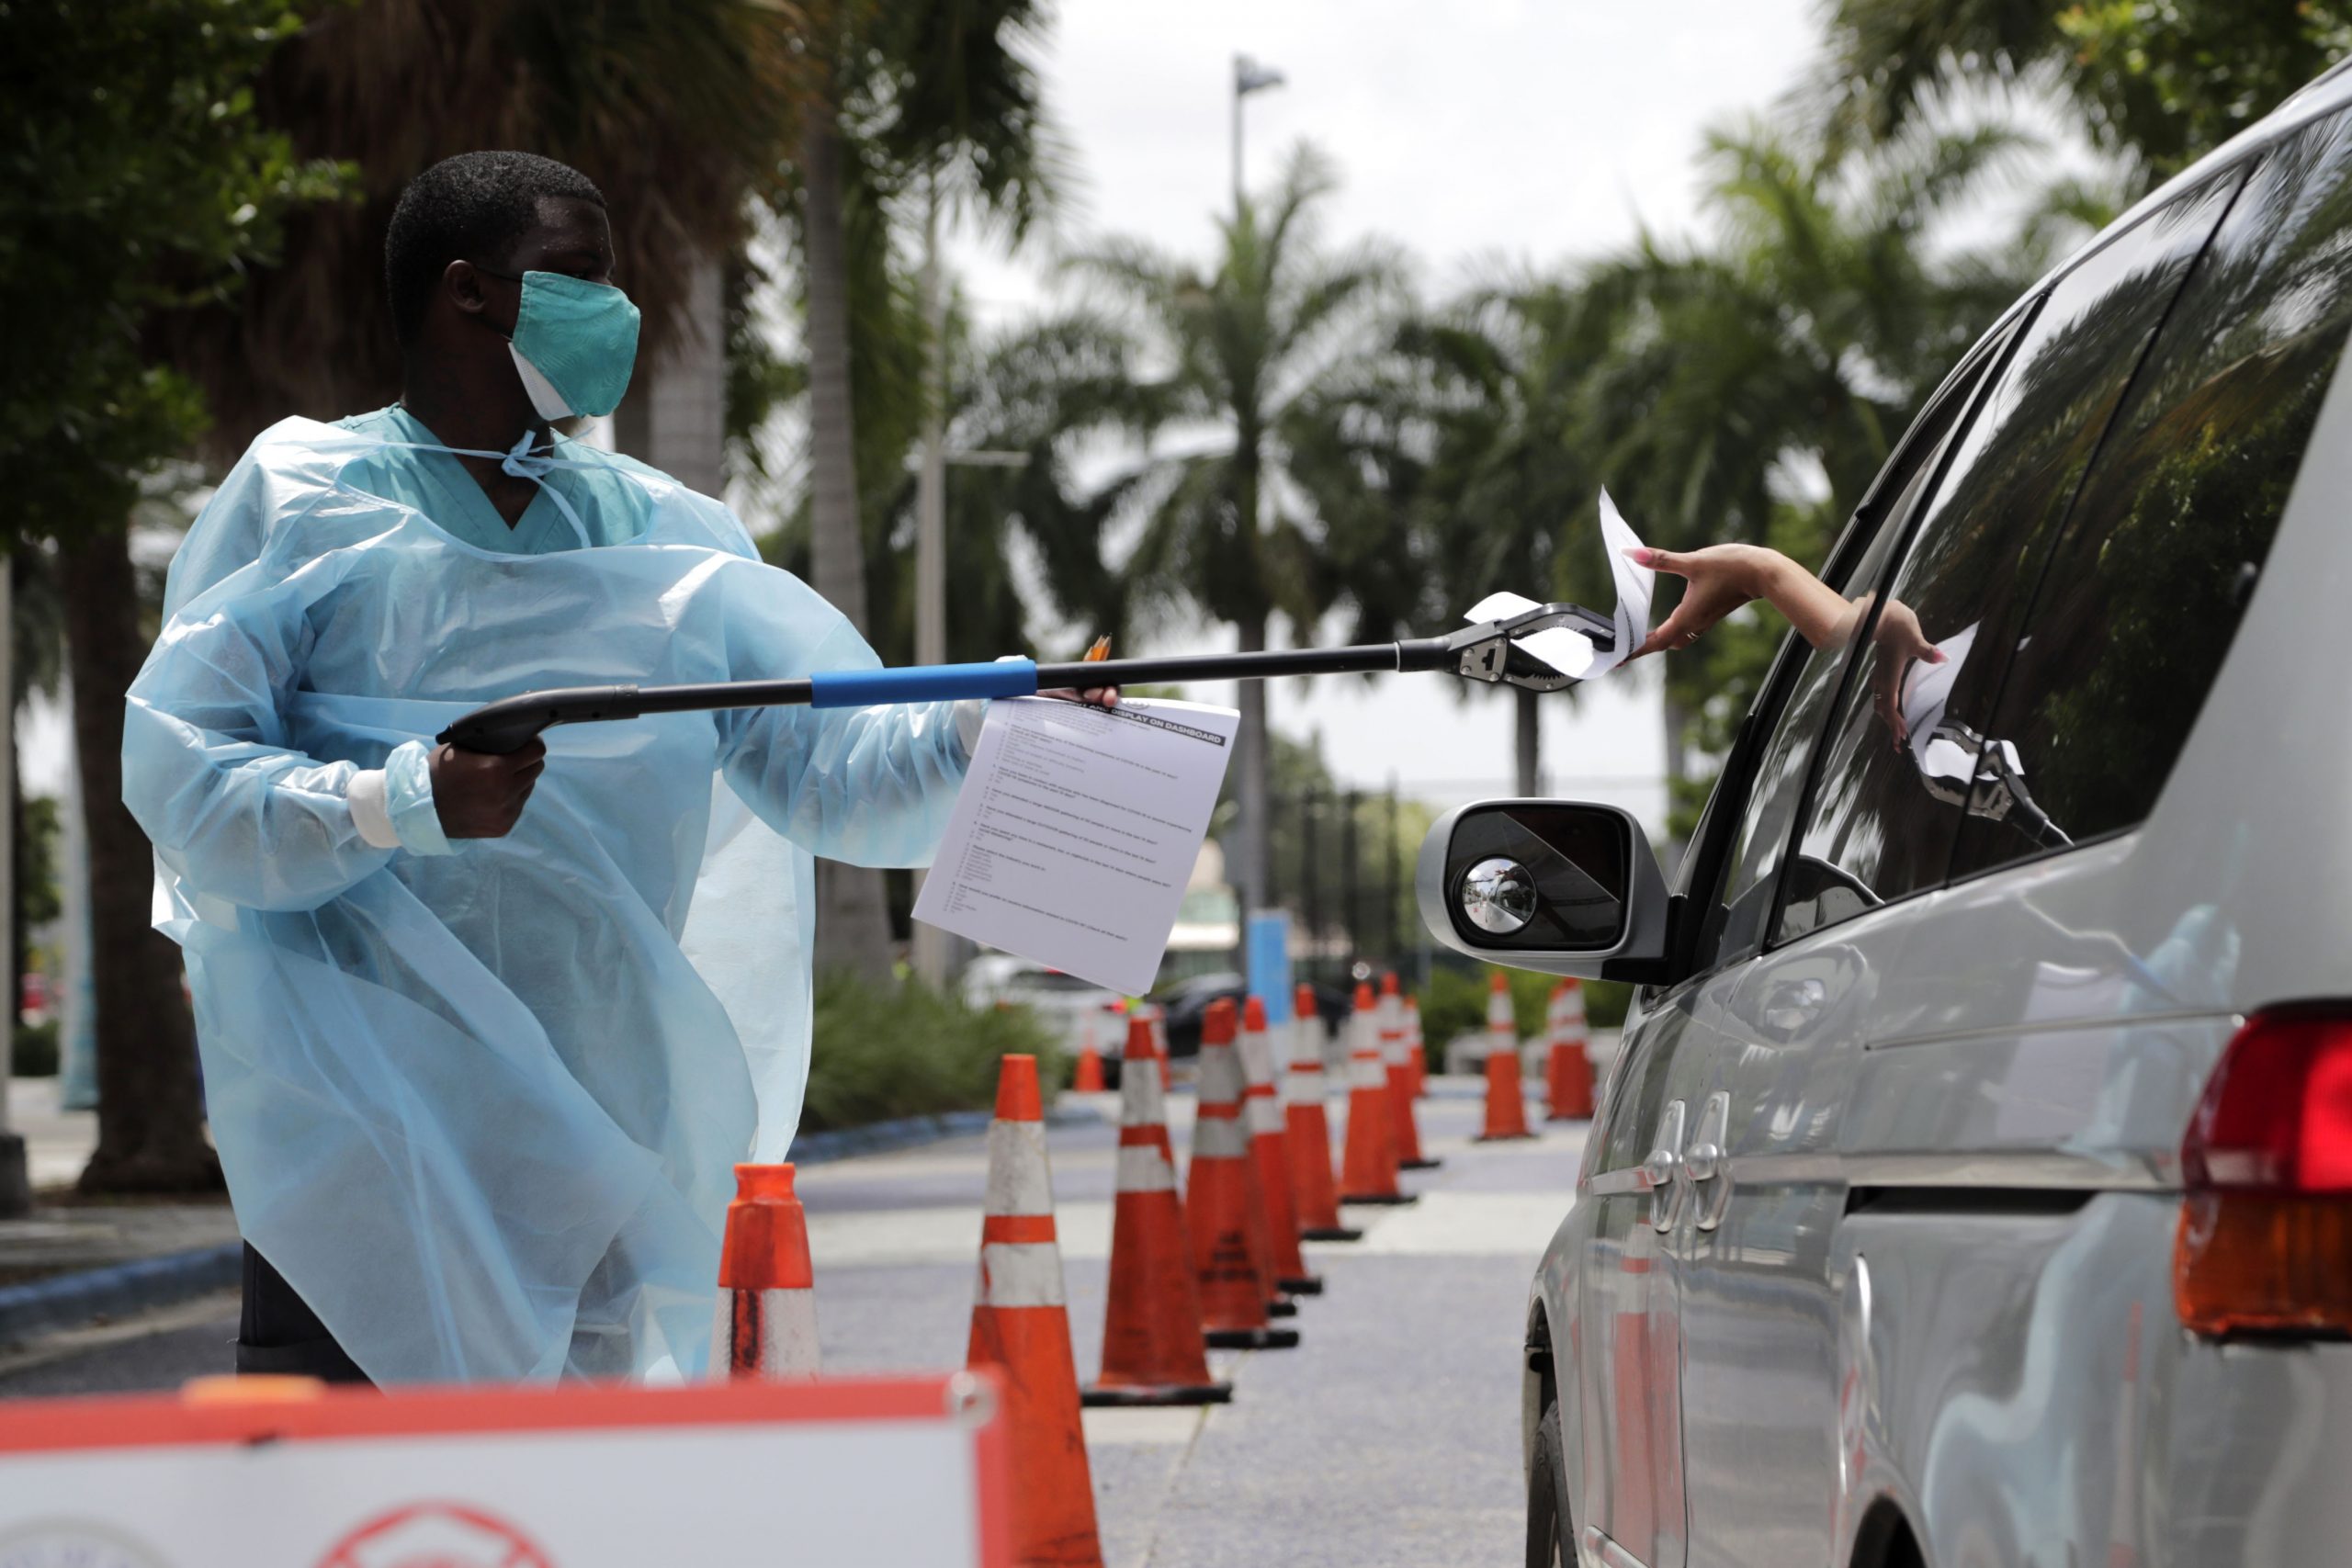 A health care worker passes paperwork to someone at a Covid-19 testing site in Miami on July 27.